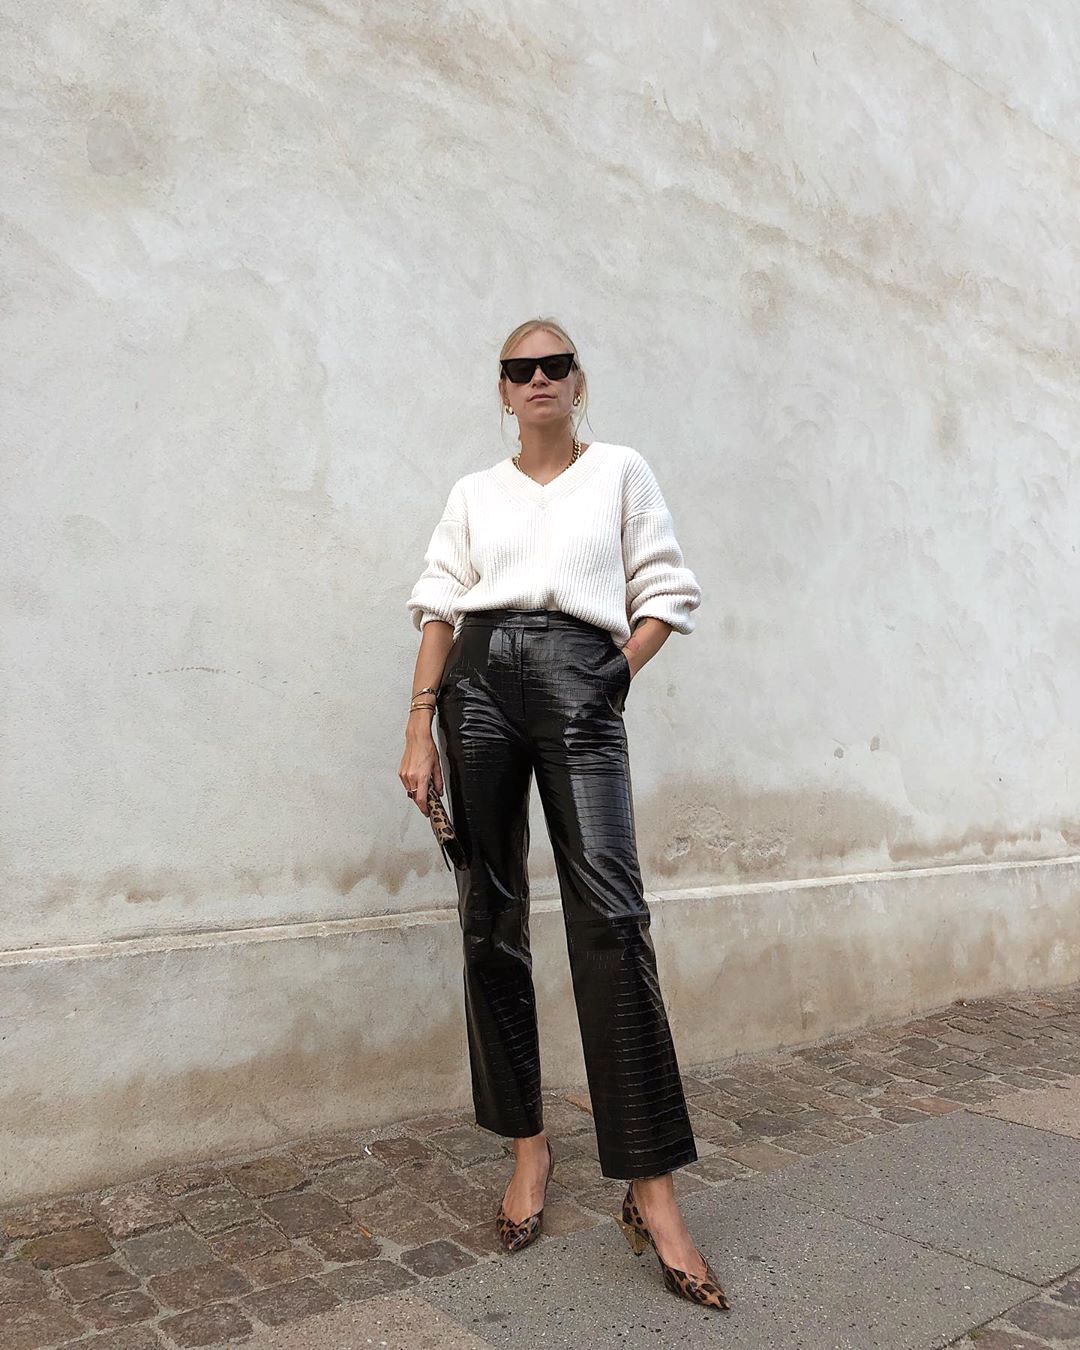 Le Fashion: A Stylish Way to Transition Leather Pants Into Spring